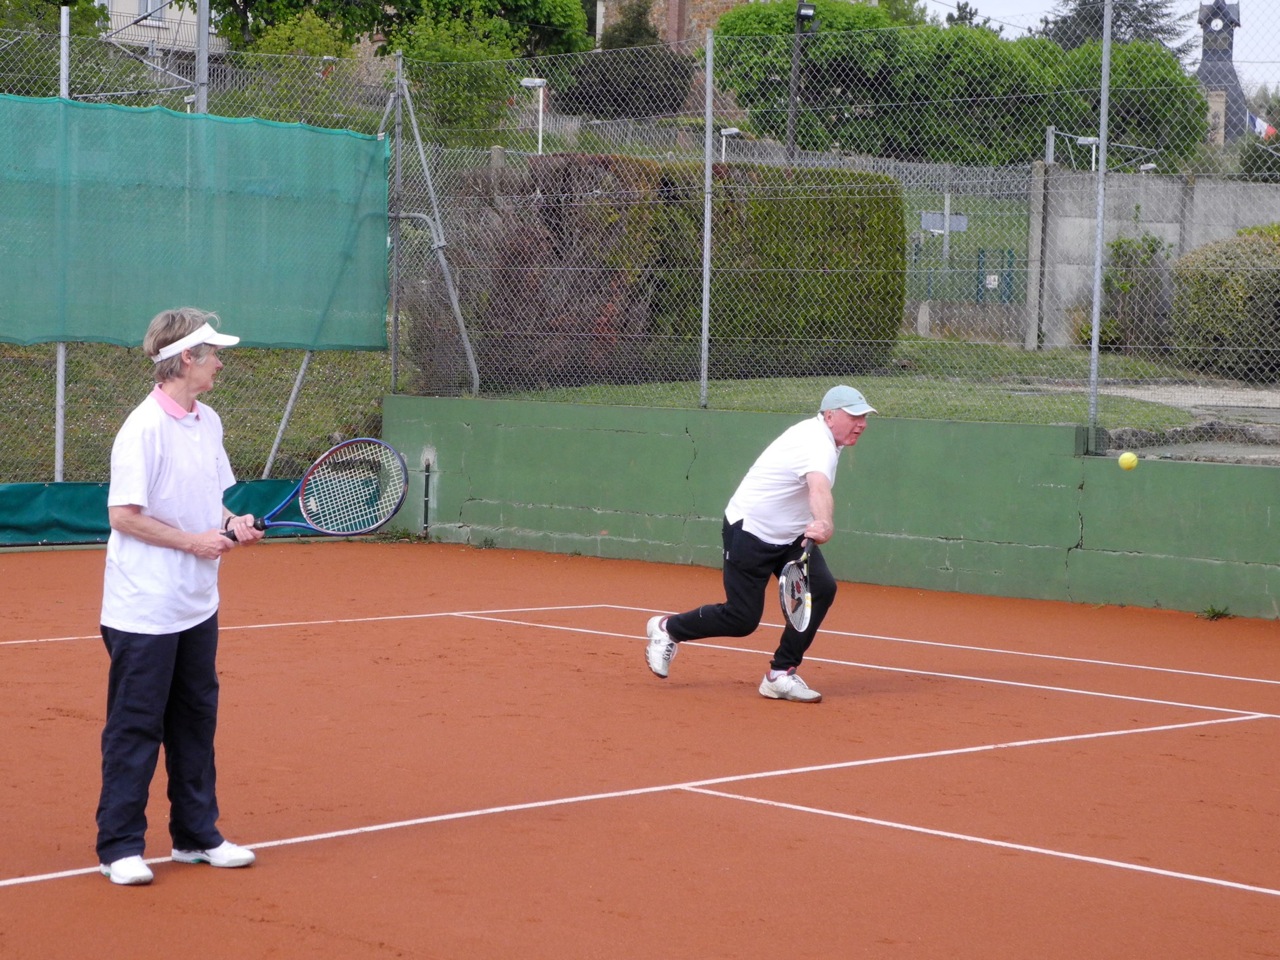 Pat Duke in action (or should that be 'inaction'?) on her way to winning the tennis tournament